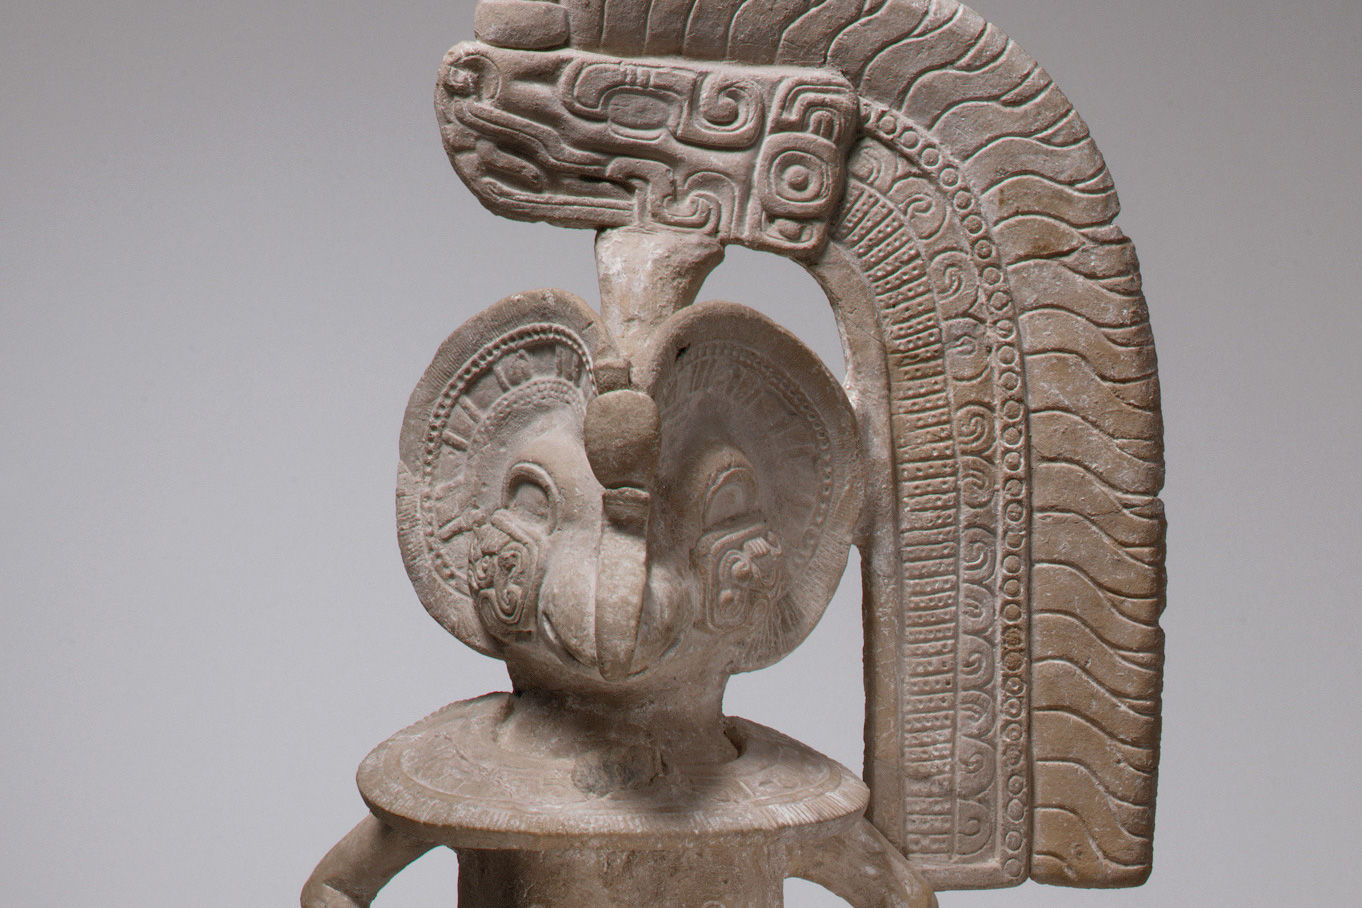 A ceramic figure wears a headdress of a feathered, horned serpent against a gray background.